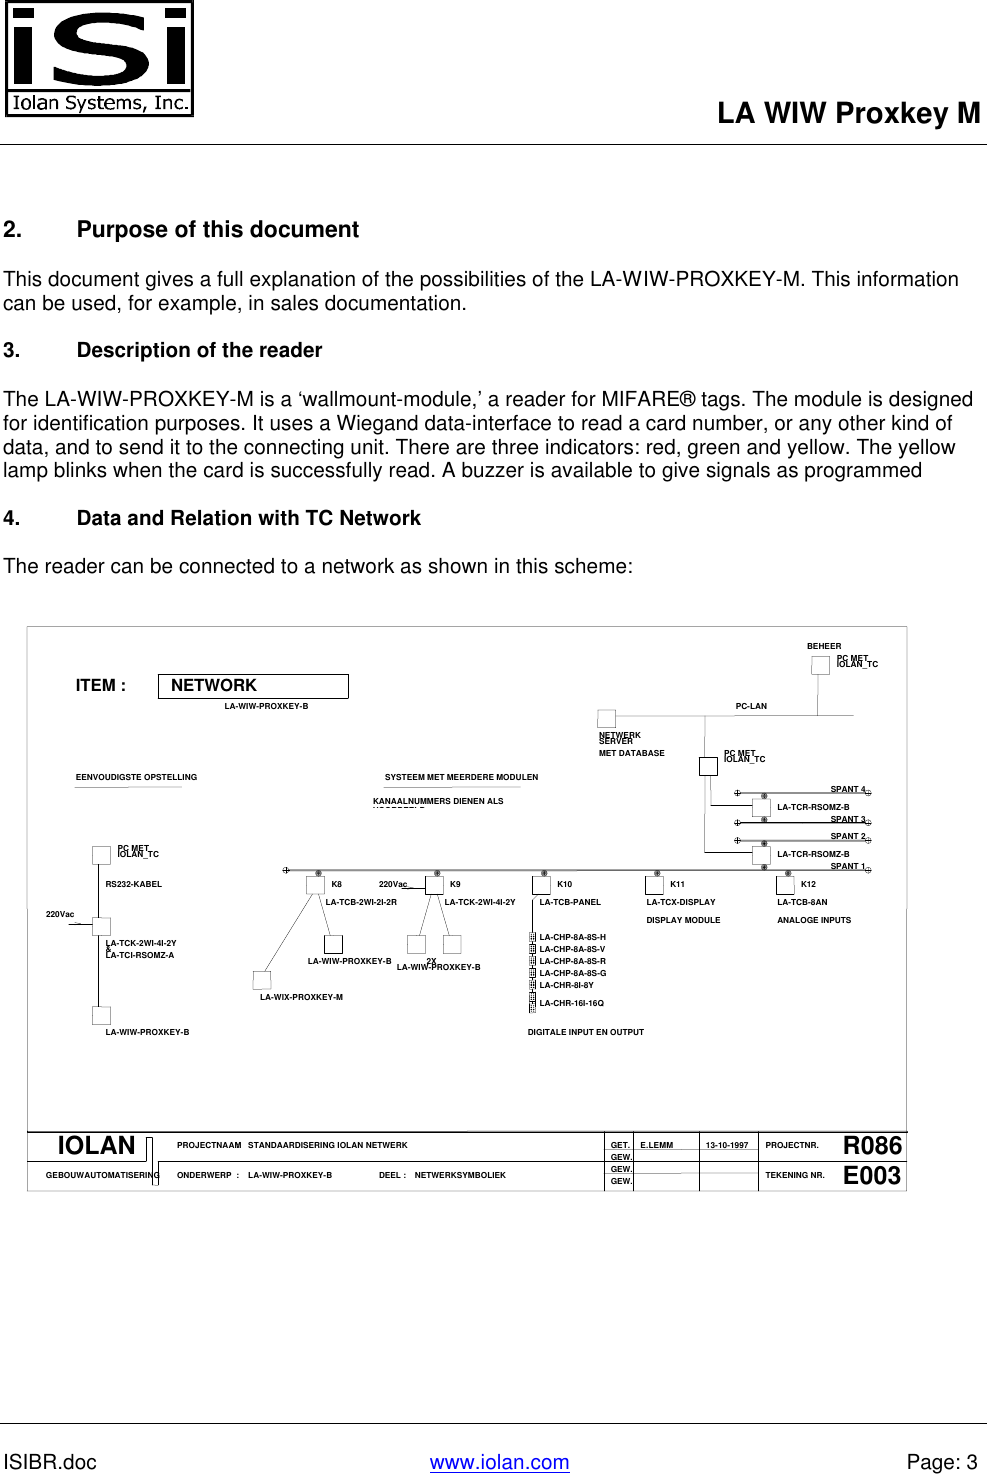 LA WIW Proxkey MISIBR.doc www.iolan.com Page: 32. Purpose of this documentThis document gives a full explanation of the possibilities of the LA-WIW-PROXKEY-M. This informationcan be used, for example, in sales documentation.3. Description of the readerThe LA-WIW-PROXKEY-M is a ‘wallmount-module,’ a reader for MIFARE® tags. The module is designedfor identification purposes. It uses a Wiegand data-interface to read a card number, or any other kind ofdata, and to send it to the connecting unit. There are three indicators: red, green and yellow. The yellowlamp blinks when the card is successfully read. A buzzer is available to give signals as programmed4. Data and Relation with TC NetworkThe reader can be connected to a network as shown in this scheme:PC METIOLAN_TCBEHEERNETWORKITEM :LA-WIW-PROXKEY-BSERVERNETWERKMET DATABASE PC METIOLAN_TCPC-LANSPANT 3SPANT 4LA-TCR-RSOMZ-BSYSTEEM MET MEERDERE MODULENKANAALNUMMERS DIENEN ALSVOORBEELDEENVOUDIGSTE OPSTELLINGRS232-KABELPC METIOLAN_TCLA-TCB-2WI-2I-2RK8LA-TCK-2WI-4I-2YK9220VacLA-TCB-PANELK10LA-TCX-DISPLAYK11LA-TCR-RSOMZ-BLA-TCB-8ANSPANT 1SPANT 2K12ANALOGE INPUTSDISPLAY MODULELA-CHP-8A-8S-HLA-CHP-8A-8S-VLA-CHP-8A-8S-R2XLA-WIW-PROXKEY-BLA-WIW-PROXKEY-BLA-TCK-2WI-4I-2Y&amp;LA-TCI-RSOMZ-A220VacLA-WIW-PROXKEY-BLA-WIX-PROXKEY-MLA-CHR-8I-8YLA-CHR-16I-16QLA-CHP-8A-8S-GDIGITALE INPUT EN OUTPUTIOLANGEBOUWAUTOMATISERINGPROJECTNAAMONDERWERP::STANDAARDISERING IOLAN NETWERKLA-WIW-PROXKEY-B DEEL : NETWERKSYMBOLIEKGET.GEW.GEW.GEW.E.LEMM PROJECTNR.TEKENING NR.13-10-1997 R086E003